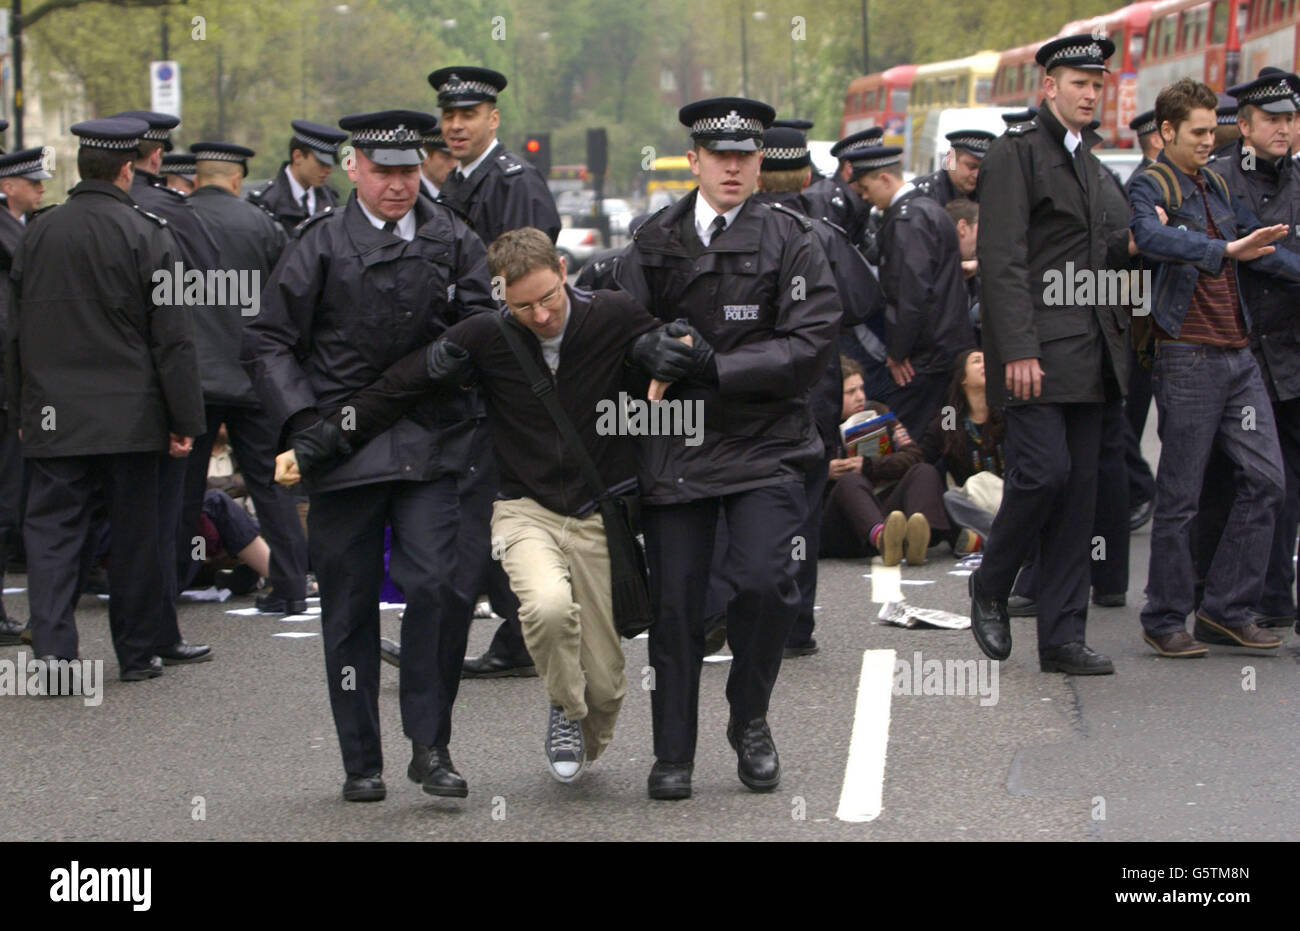 An activist from the Get Kissinger Group is led away by police whilst protesting against the arrival of Henry Kissinger, the former United States Secretary of State, who is to speak at an Institute of Directors meeting at the Royal Albert Hall in London. *Human rights campaigners and a group of leftwing Labour MPs have accused Dr Kissinger of aiding and abetting war crimes in Vietnam, Laos and Cambodia when he was in office. The theme of the conference, globalisation, was also expected to spark protests from anti-globalisation campaigners. Stock Photo